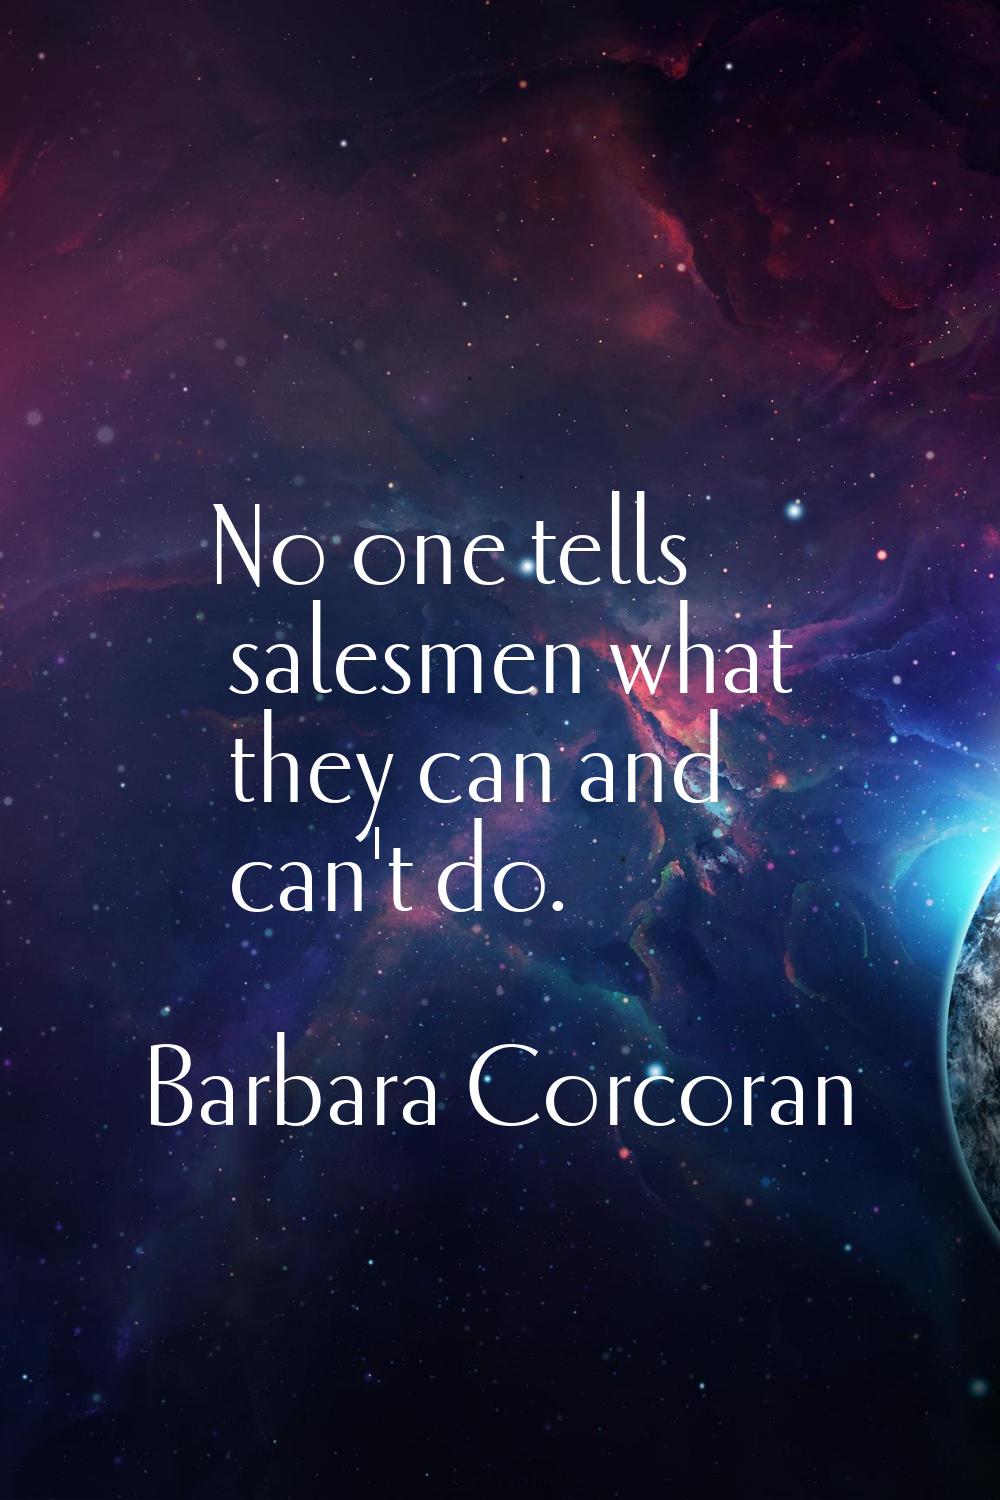 No one tells salesmen what they can and can't do.